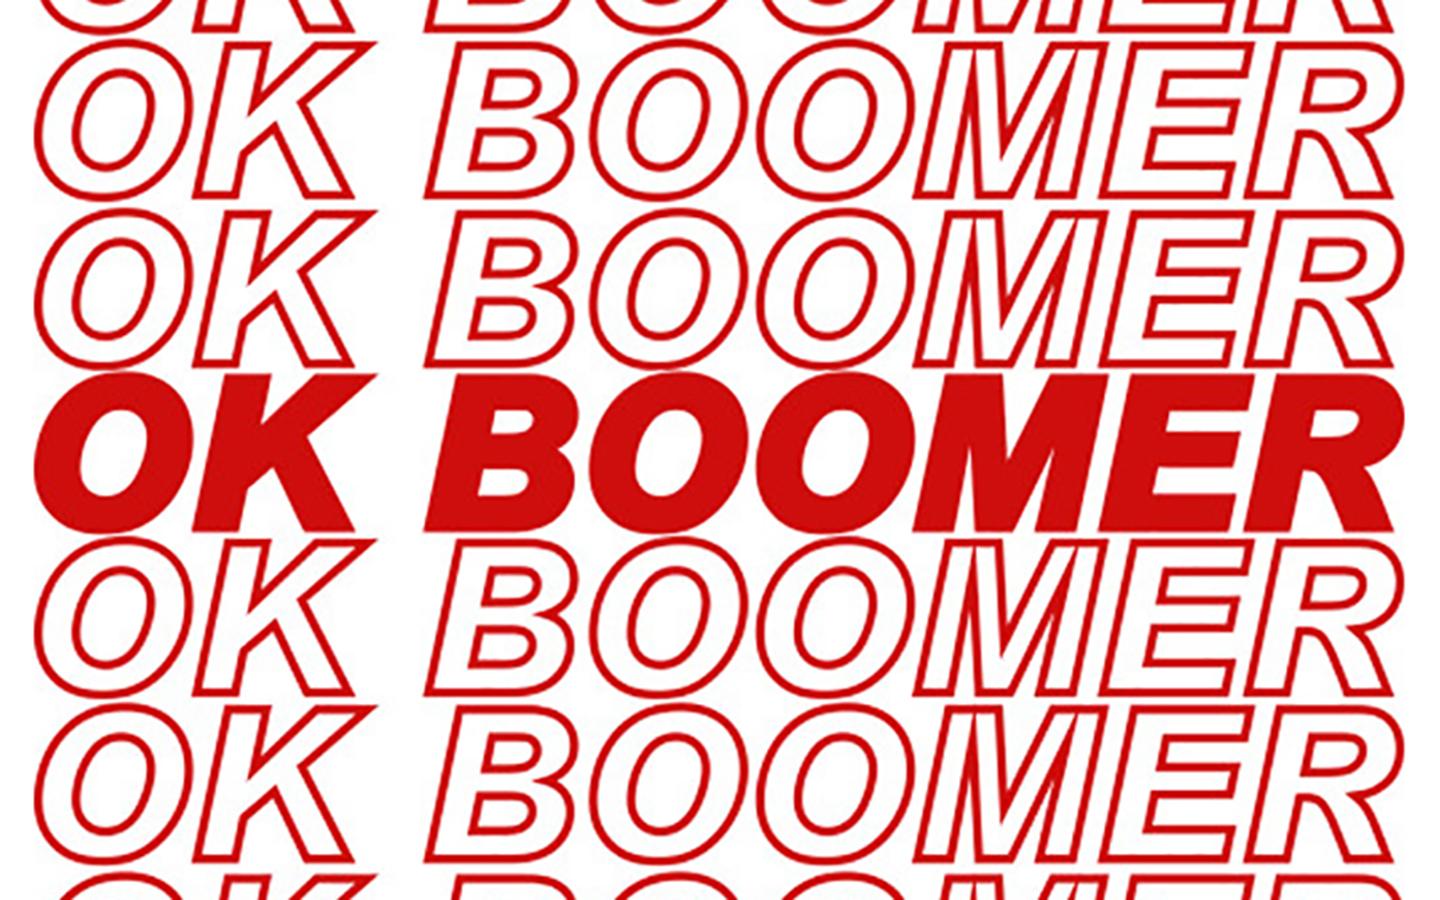 What's the font used in the 'ok boomer' merchandise